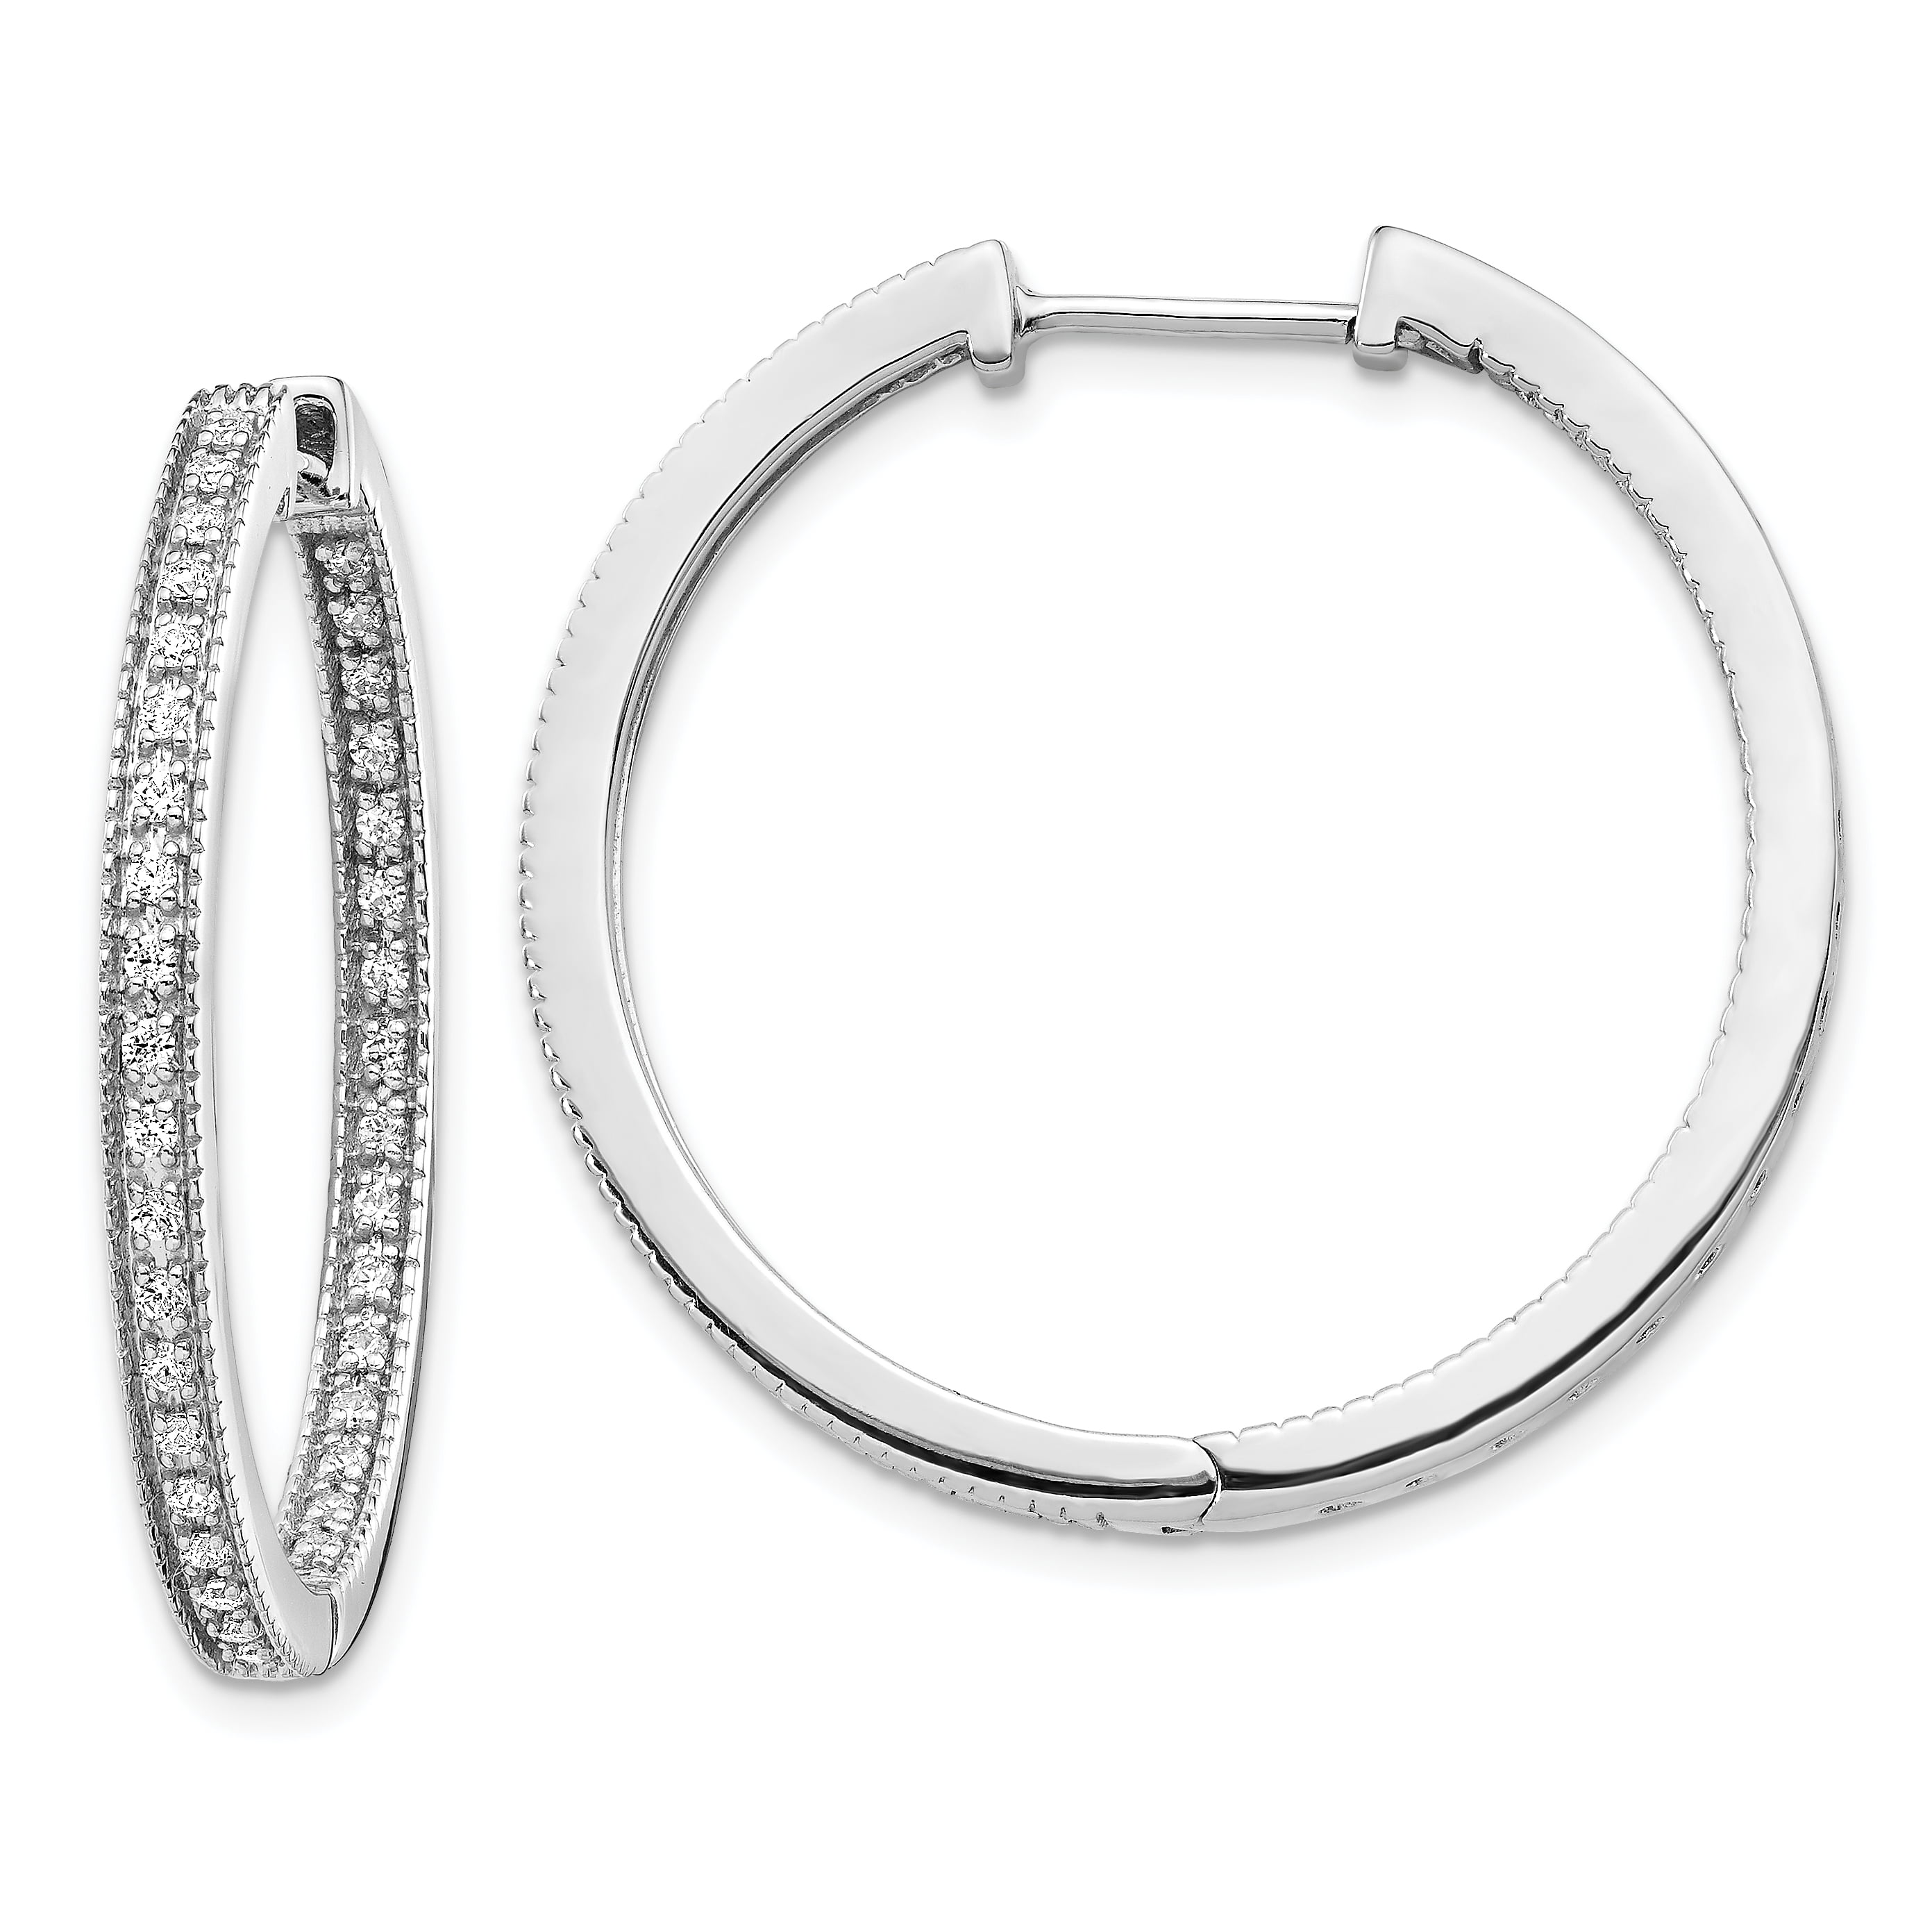 Finest Gold 14K White Gold Polished Diamond In-Out Hinged Hoop Earrings